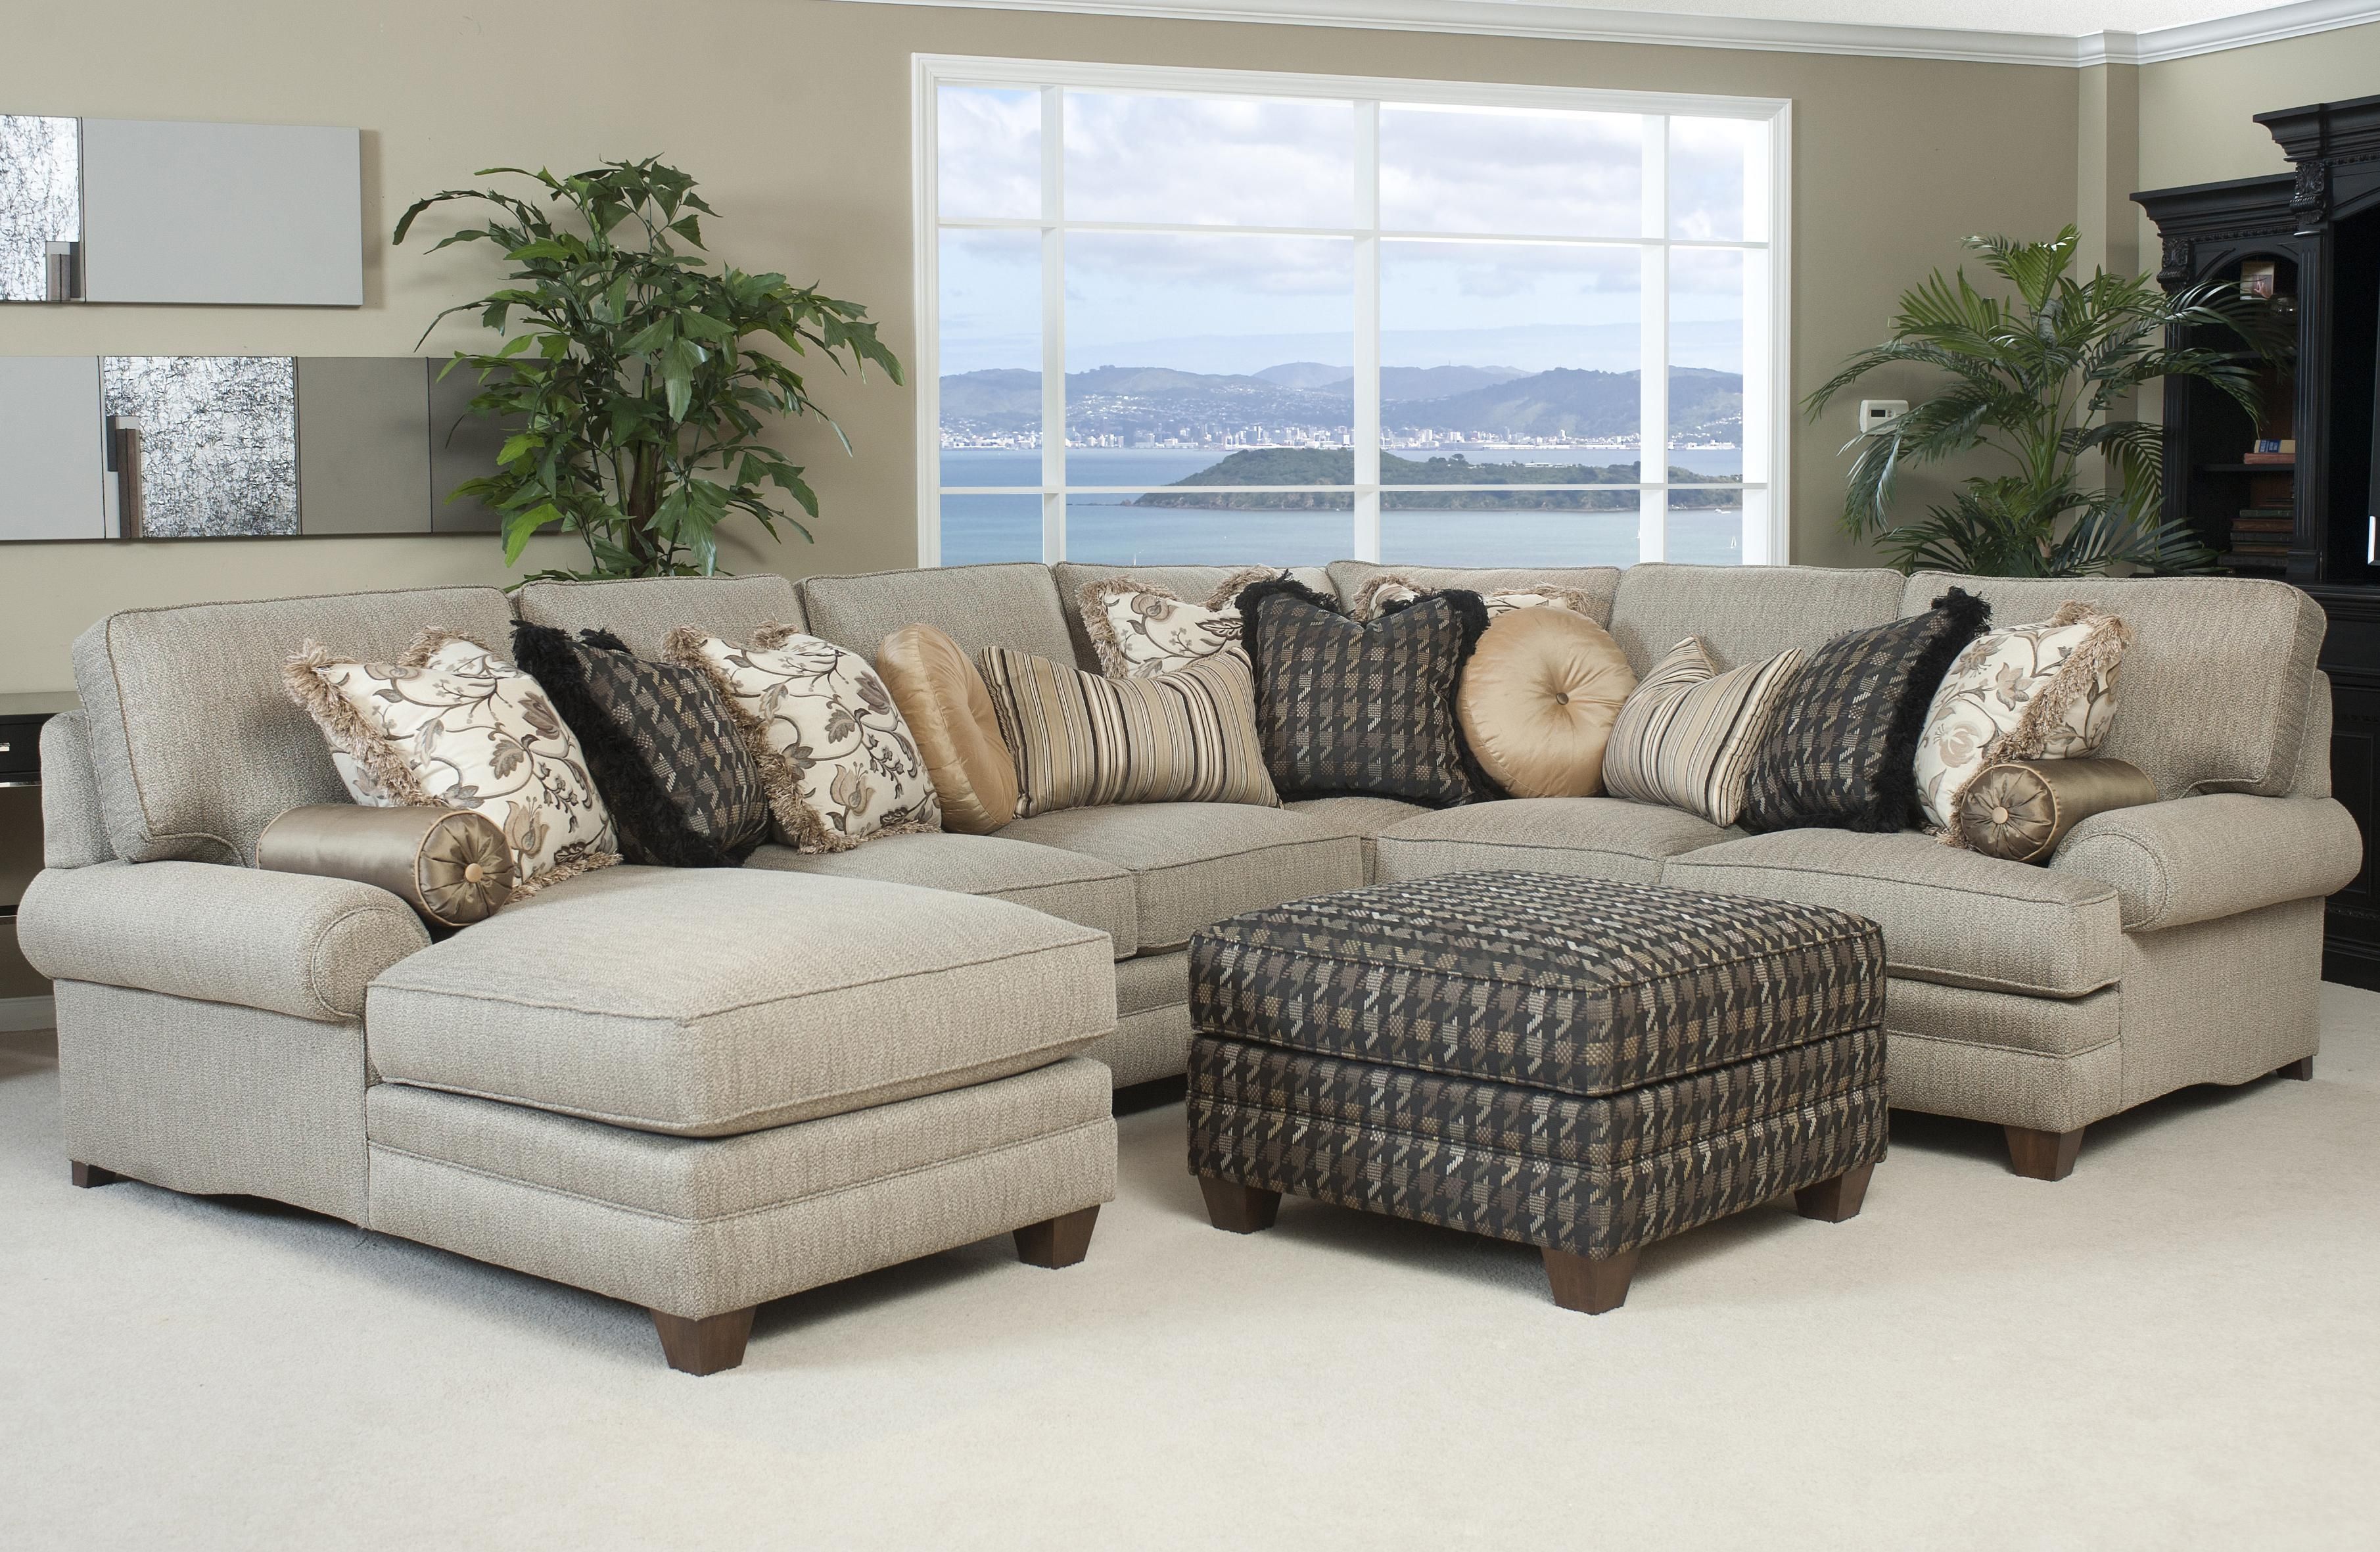 Awesome Gray Sectional Sofa With Chaise Lounge 17 In Cozy Pertaining To Cozy Sectional Sofas (View 12 of 12)